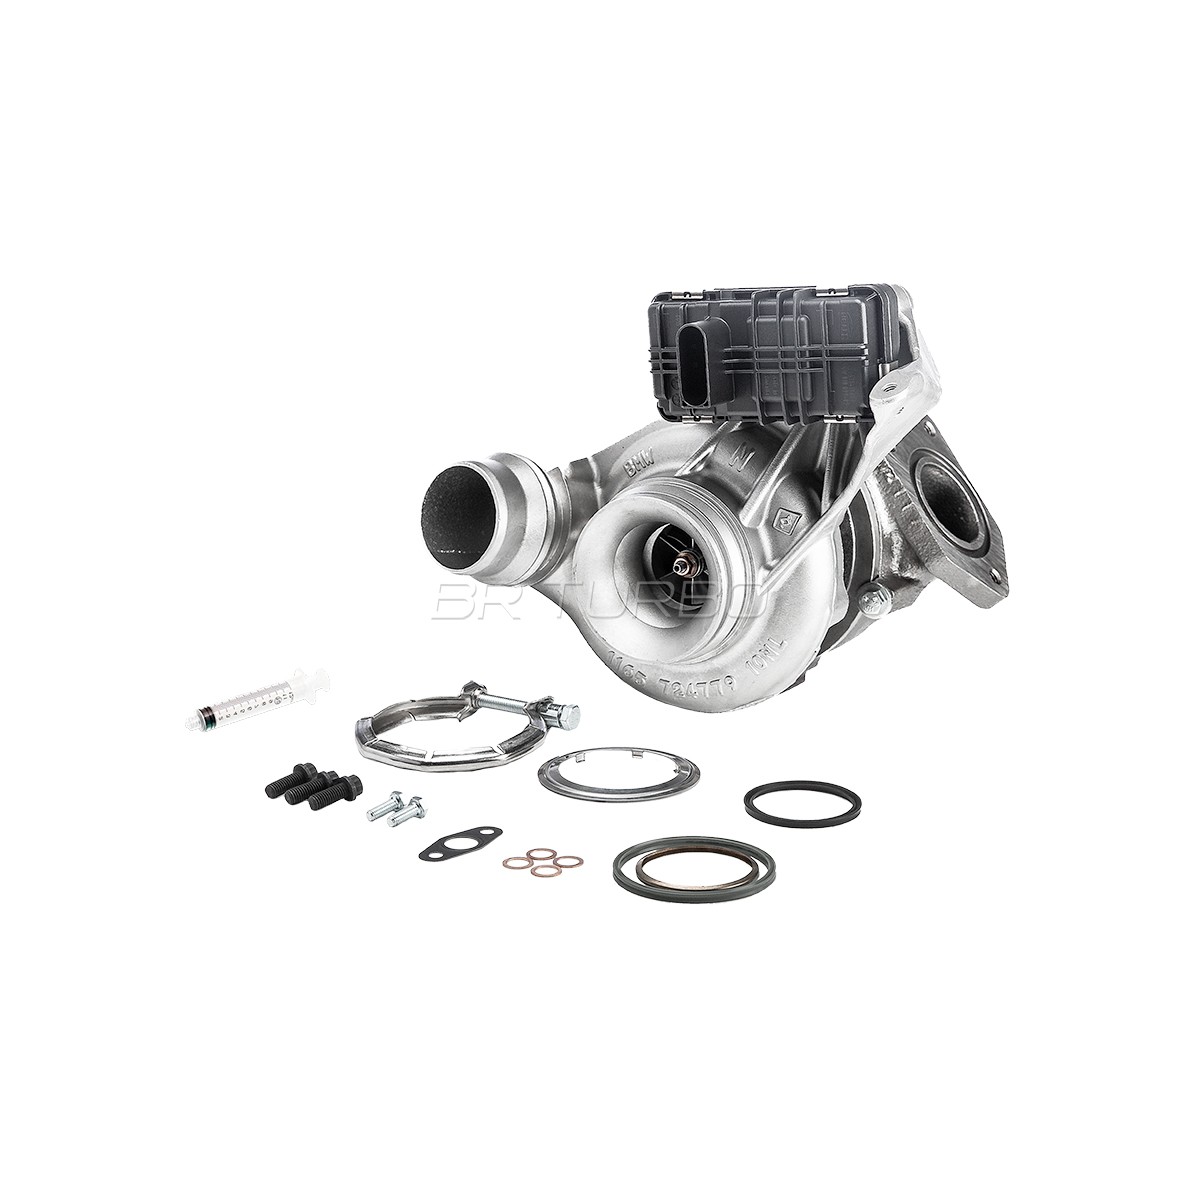 4933500585RSM Turbocharger REMANUFACTURED TURBOCHARGER WITH MOUNTING KIT BR Turbo 4933500585RSM review and test